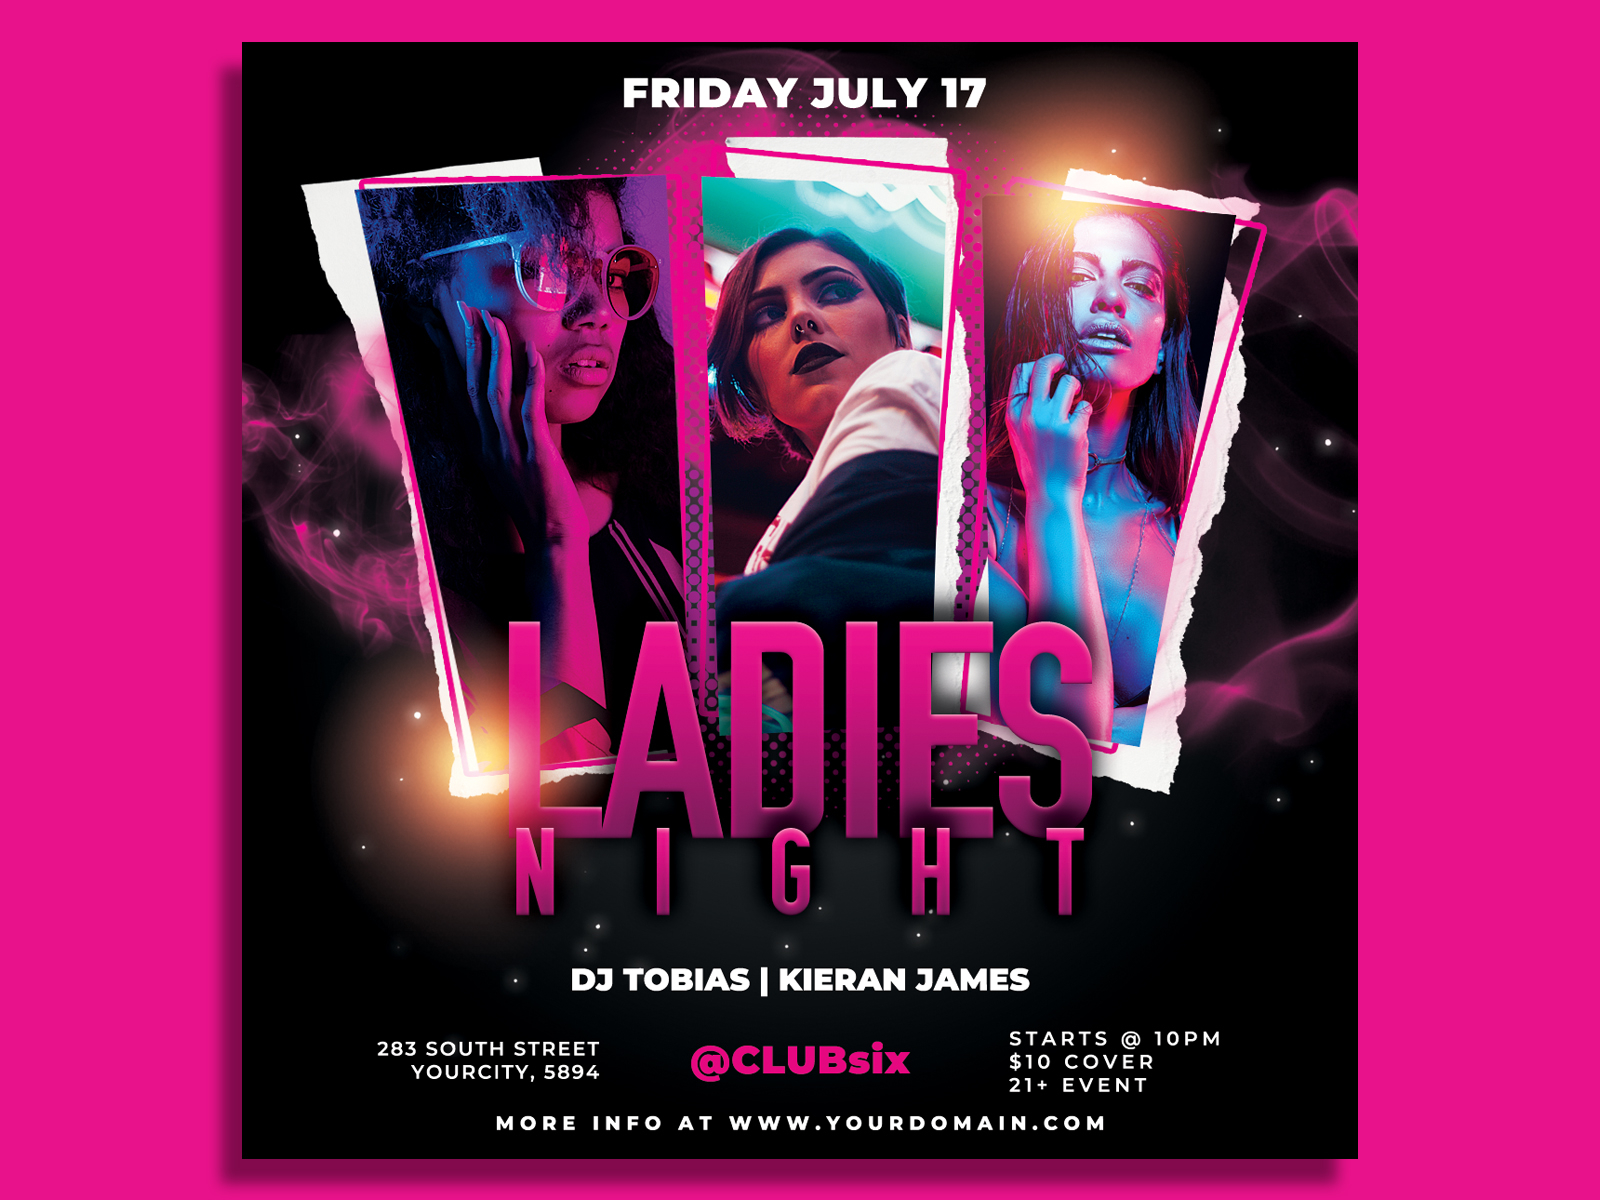 Ladies Night Flyer Template by Hotpin on Dribbble